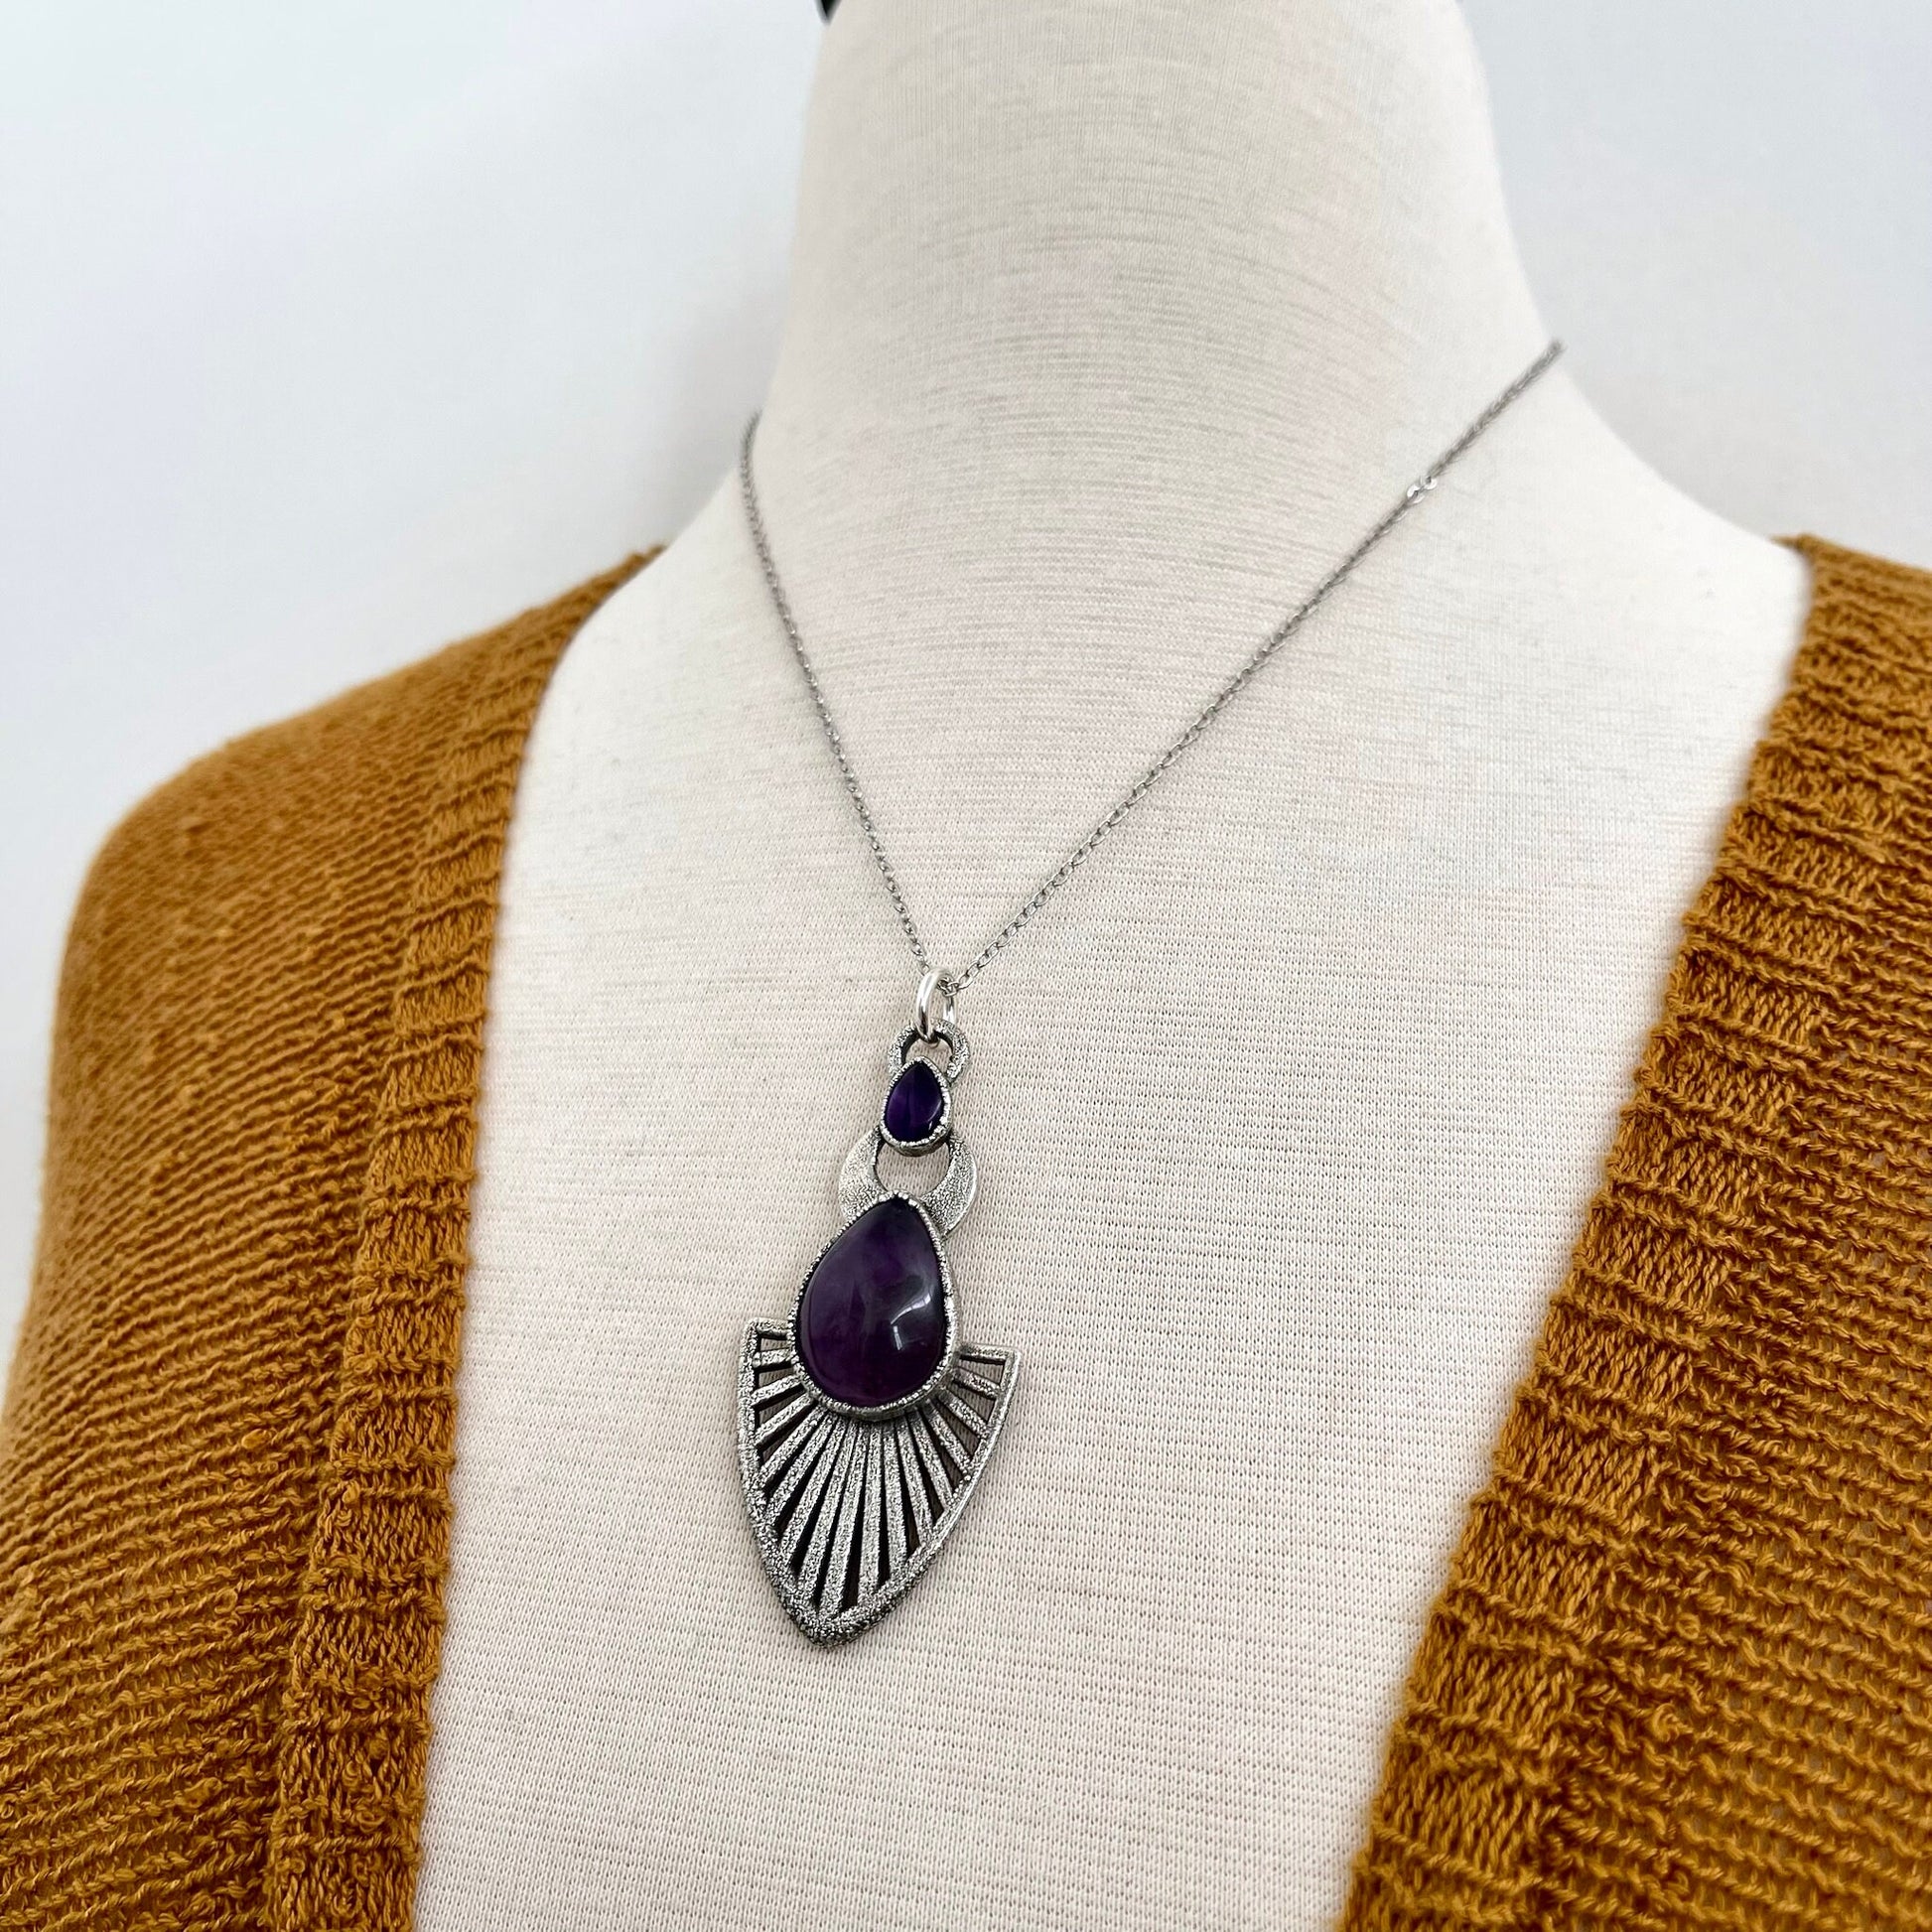 Moss & Moon Collection - Purple Amethyst Crystal Necklace in Fine Silver / / Gothic Necklace Witchy Pendent Crystal Gemstone Jewelry